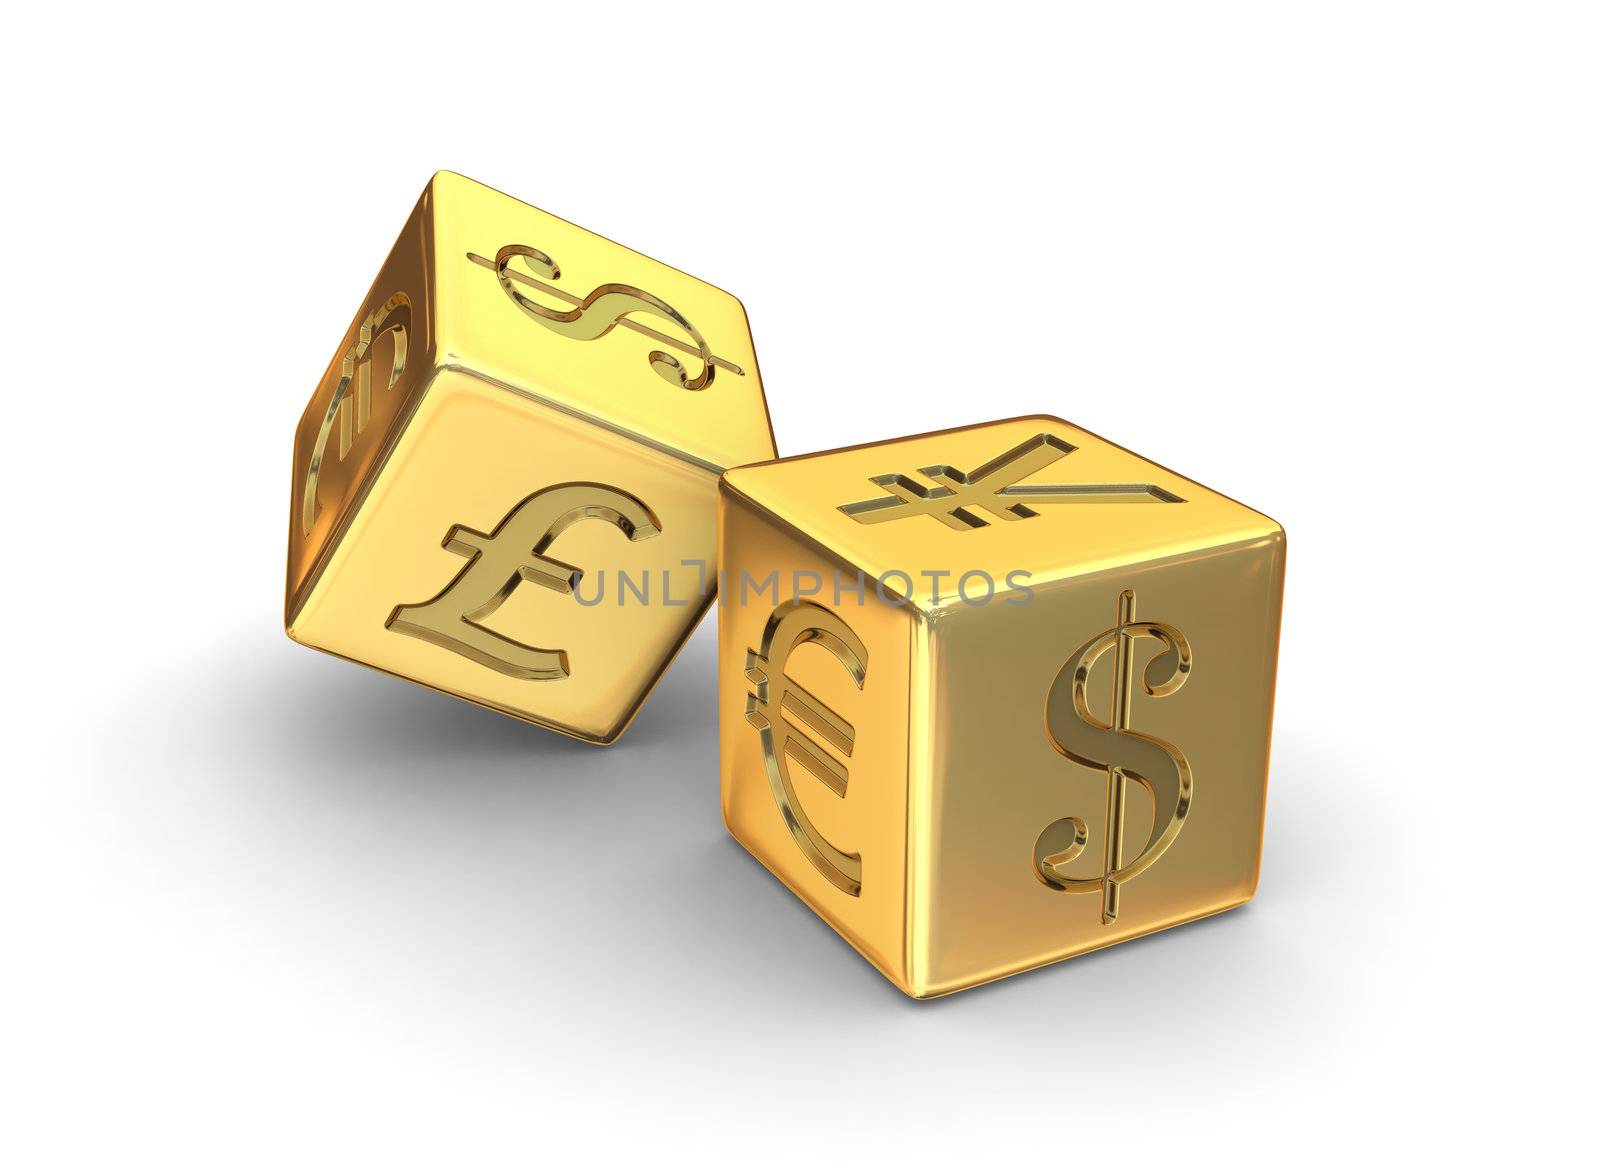 Two Gold dice engraved with Dollar, Yen, Euro and Pound currency symbols on white background.